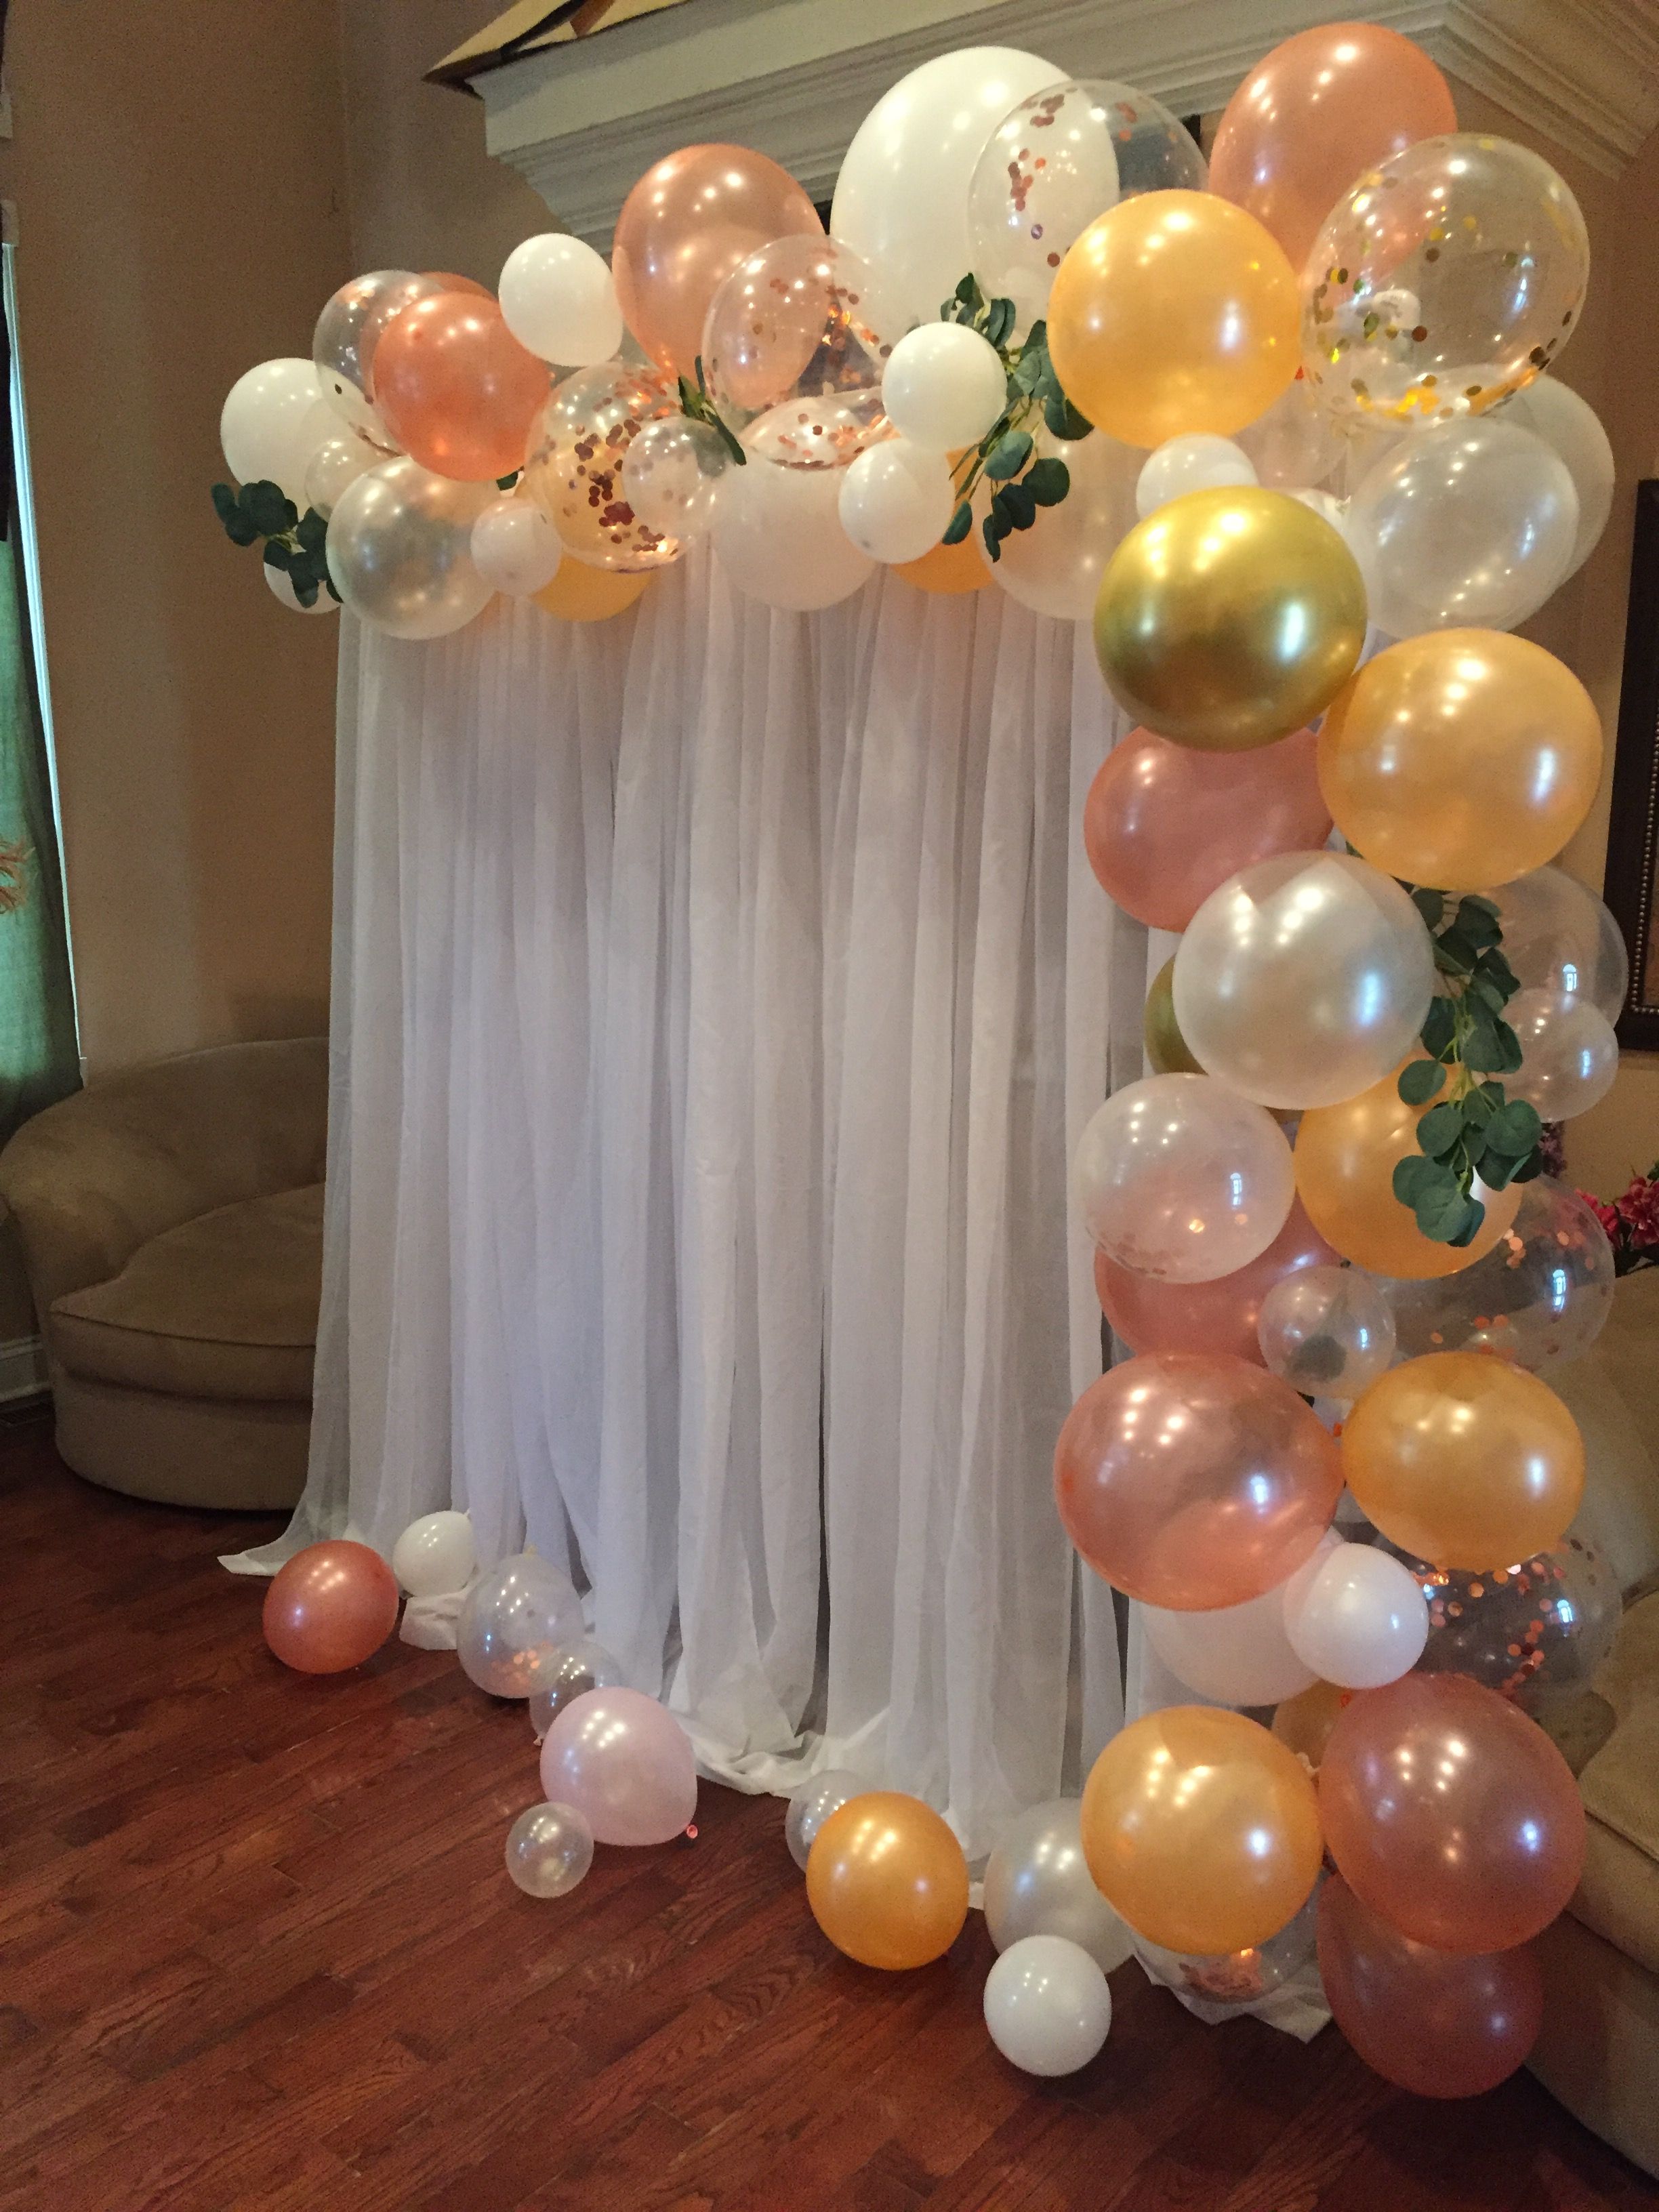 Andrea Escobar on Birthday Baby shower party decorations